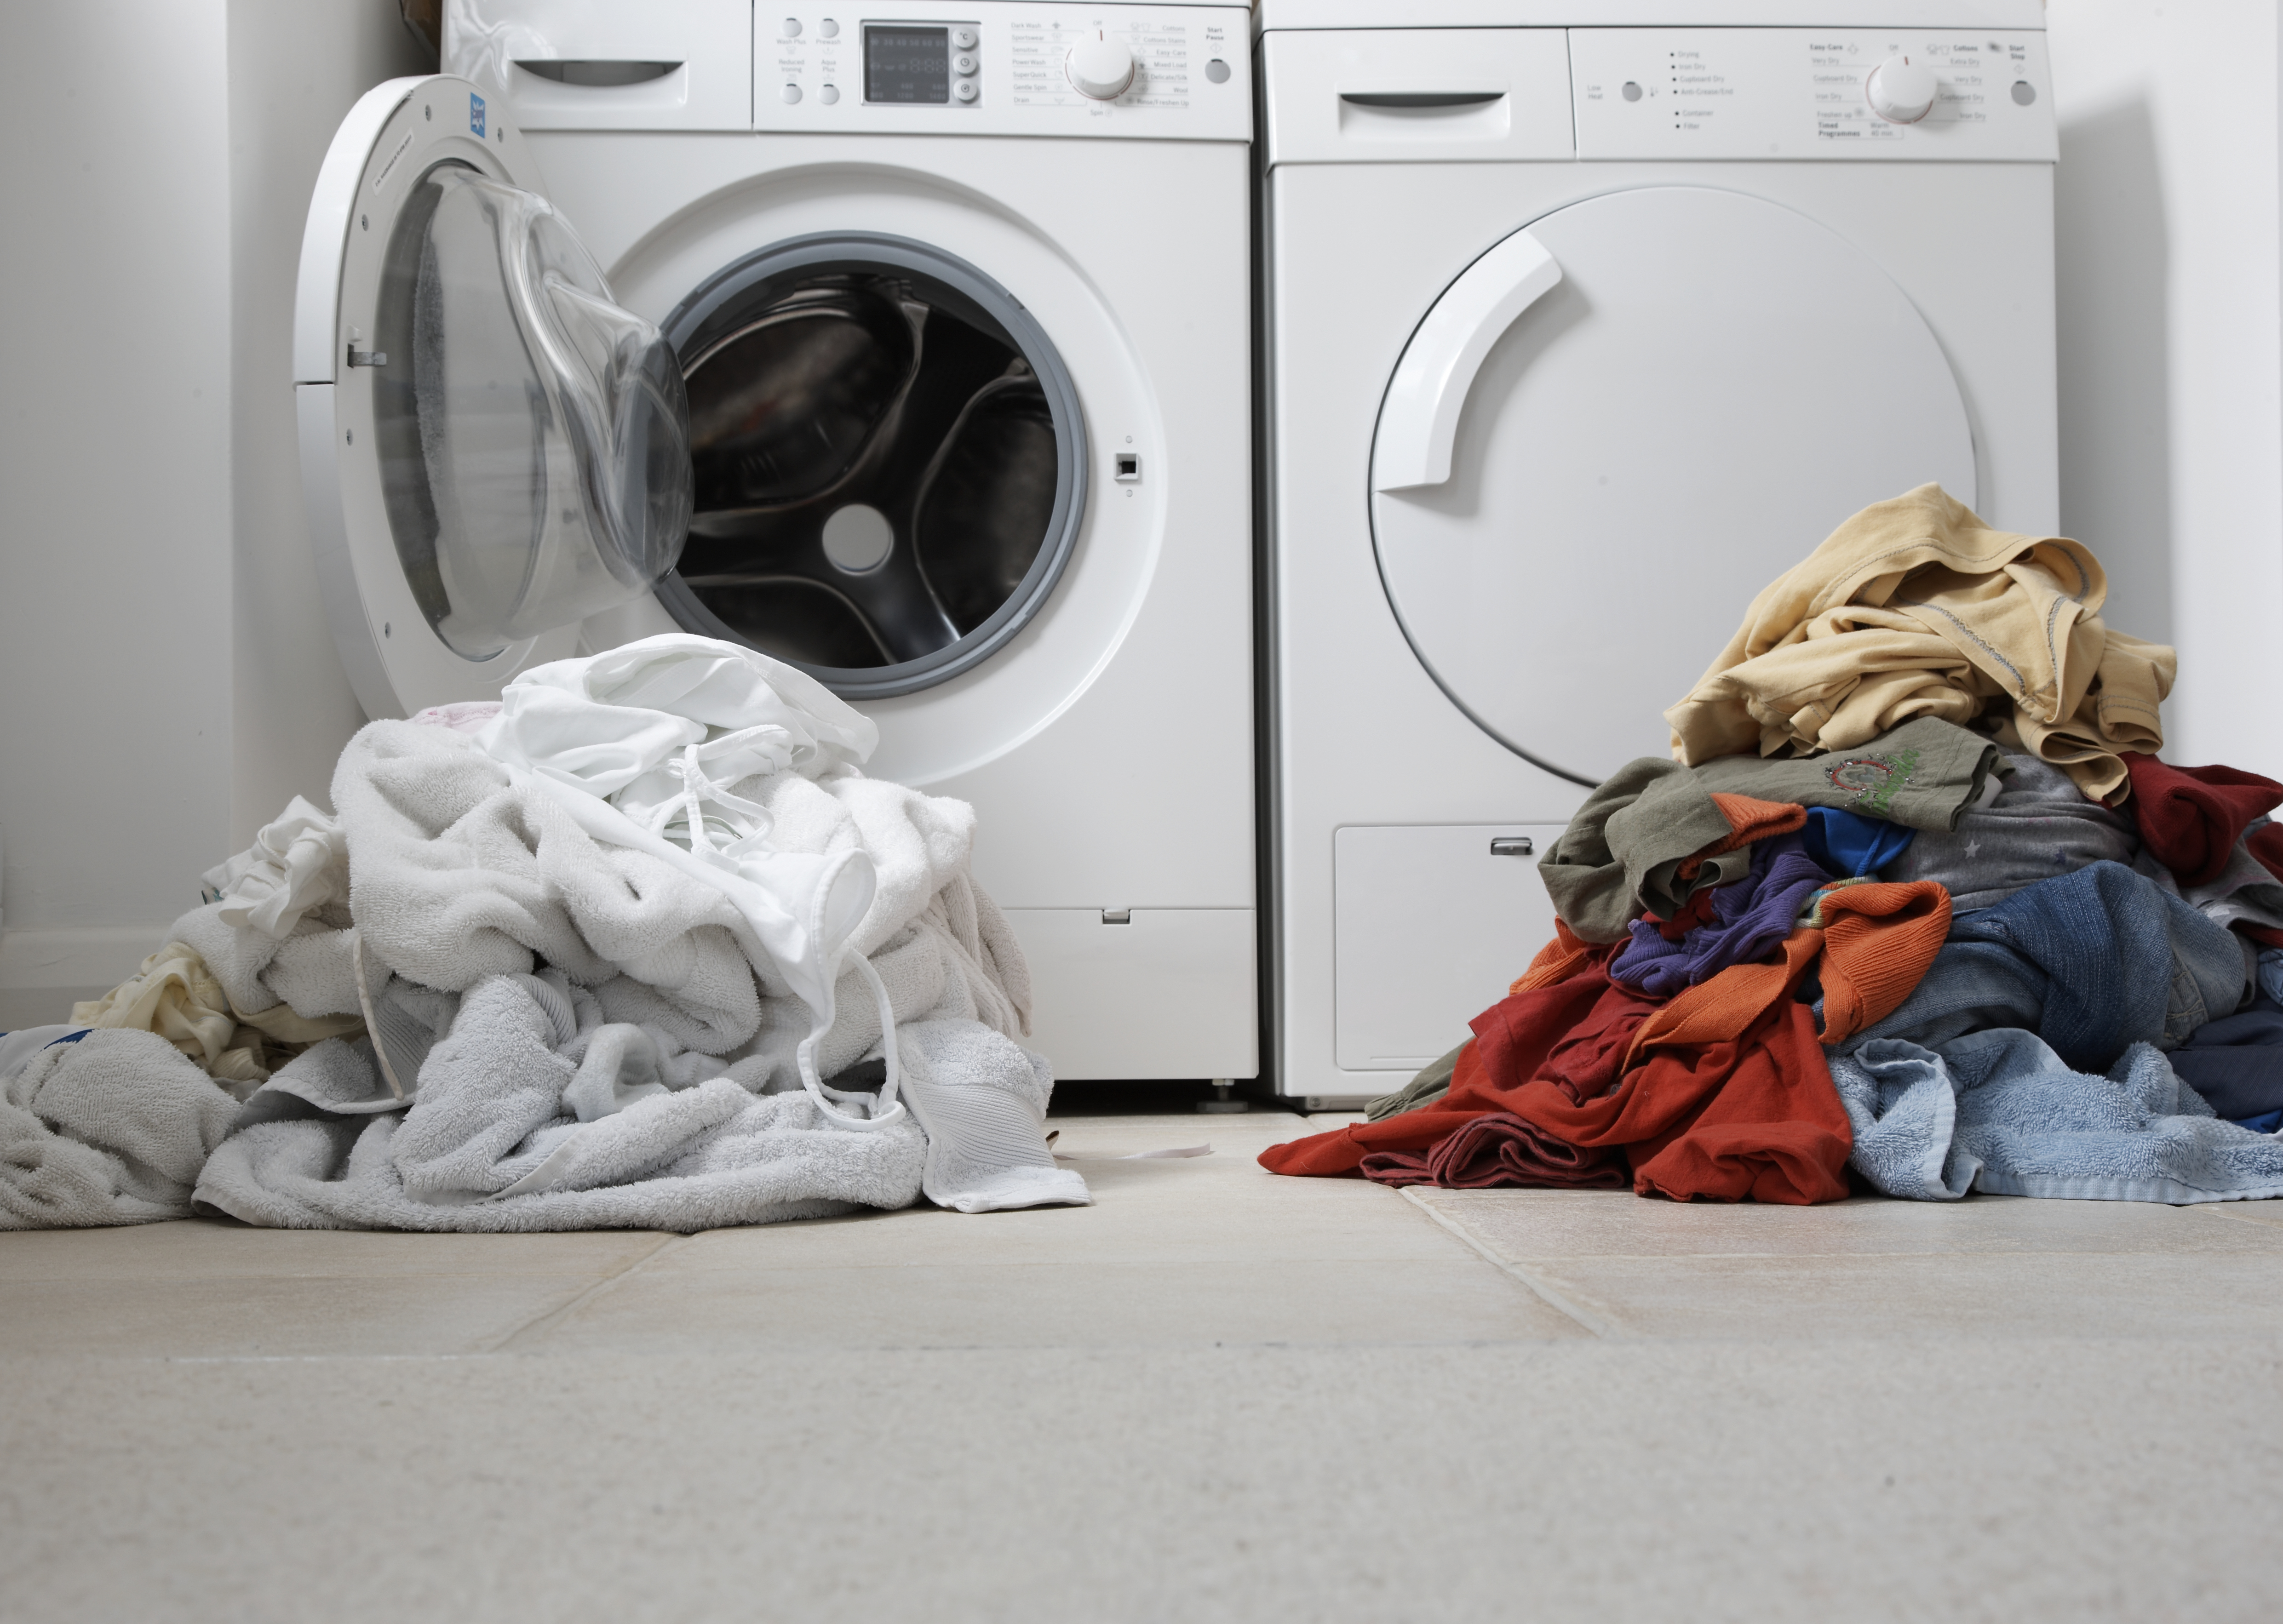 Will my clothes smell if I leave them in the dryer overnight?